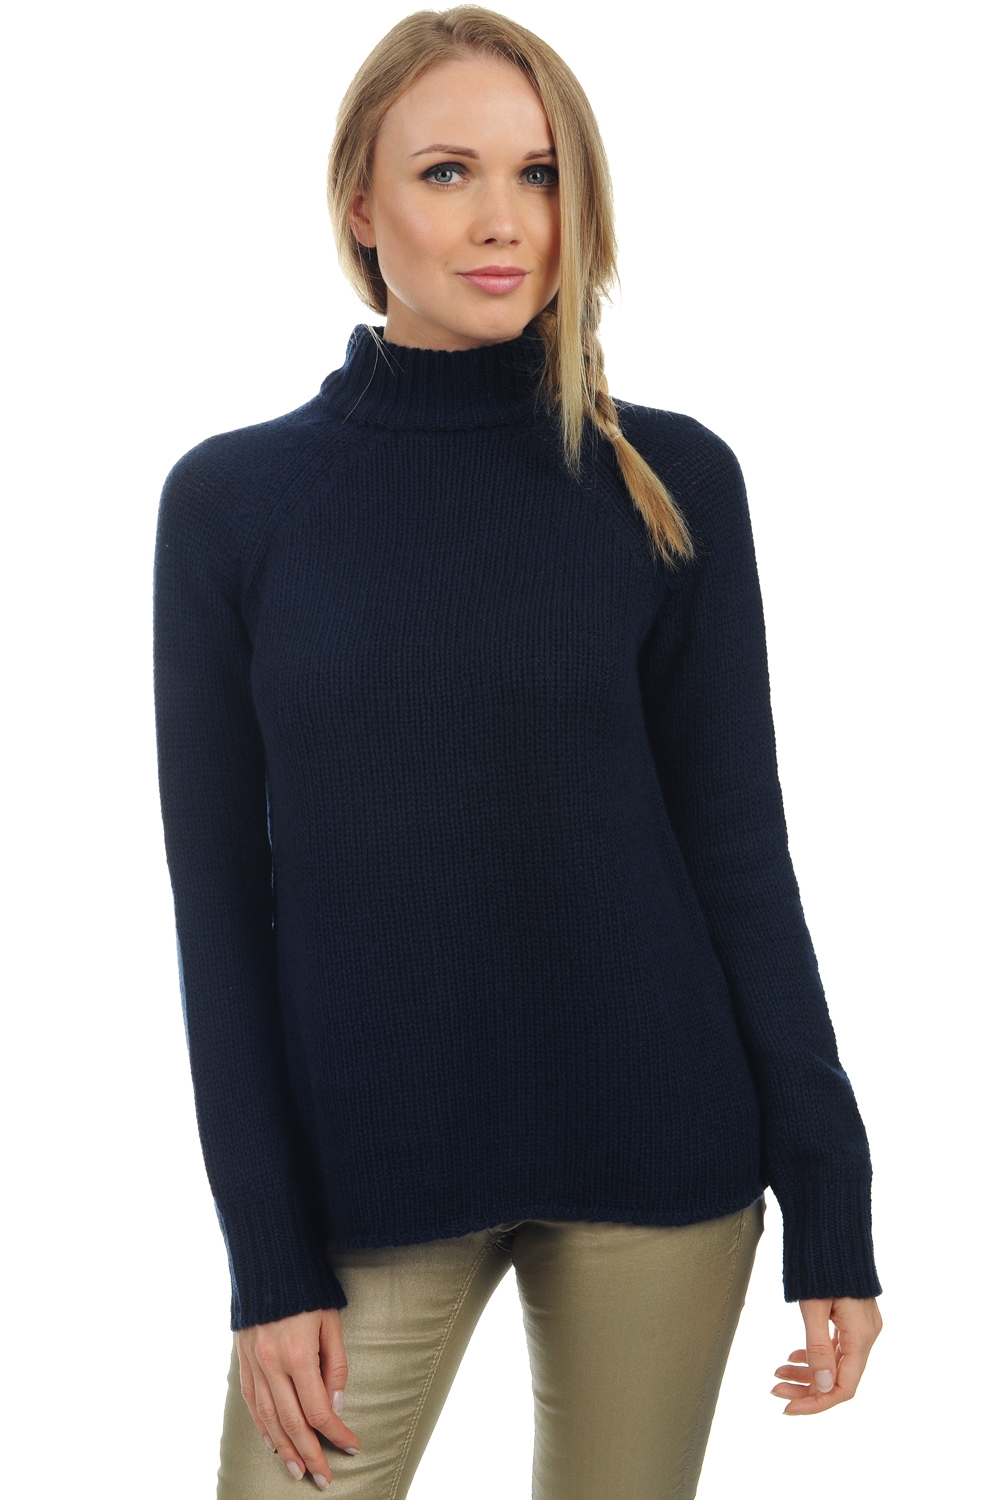 Cachemire pull femme col roule louisa marine fonce xl